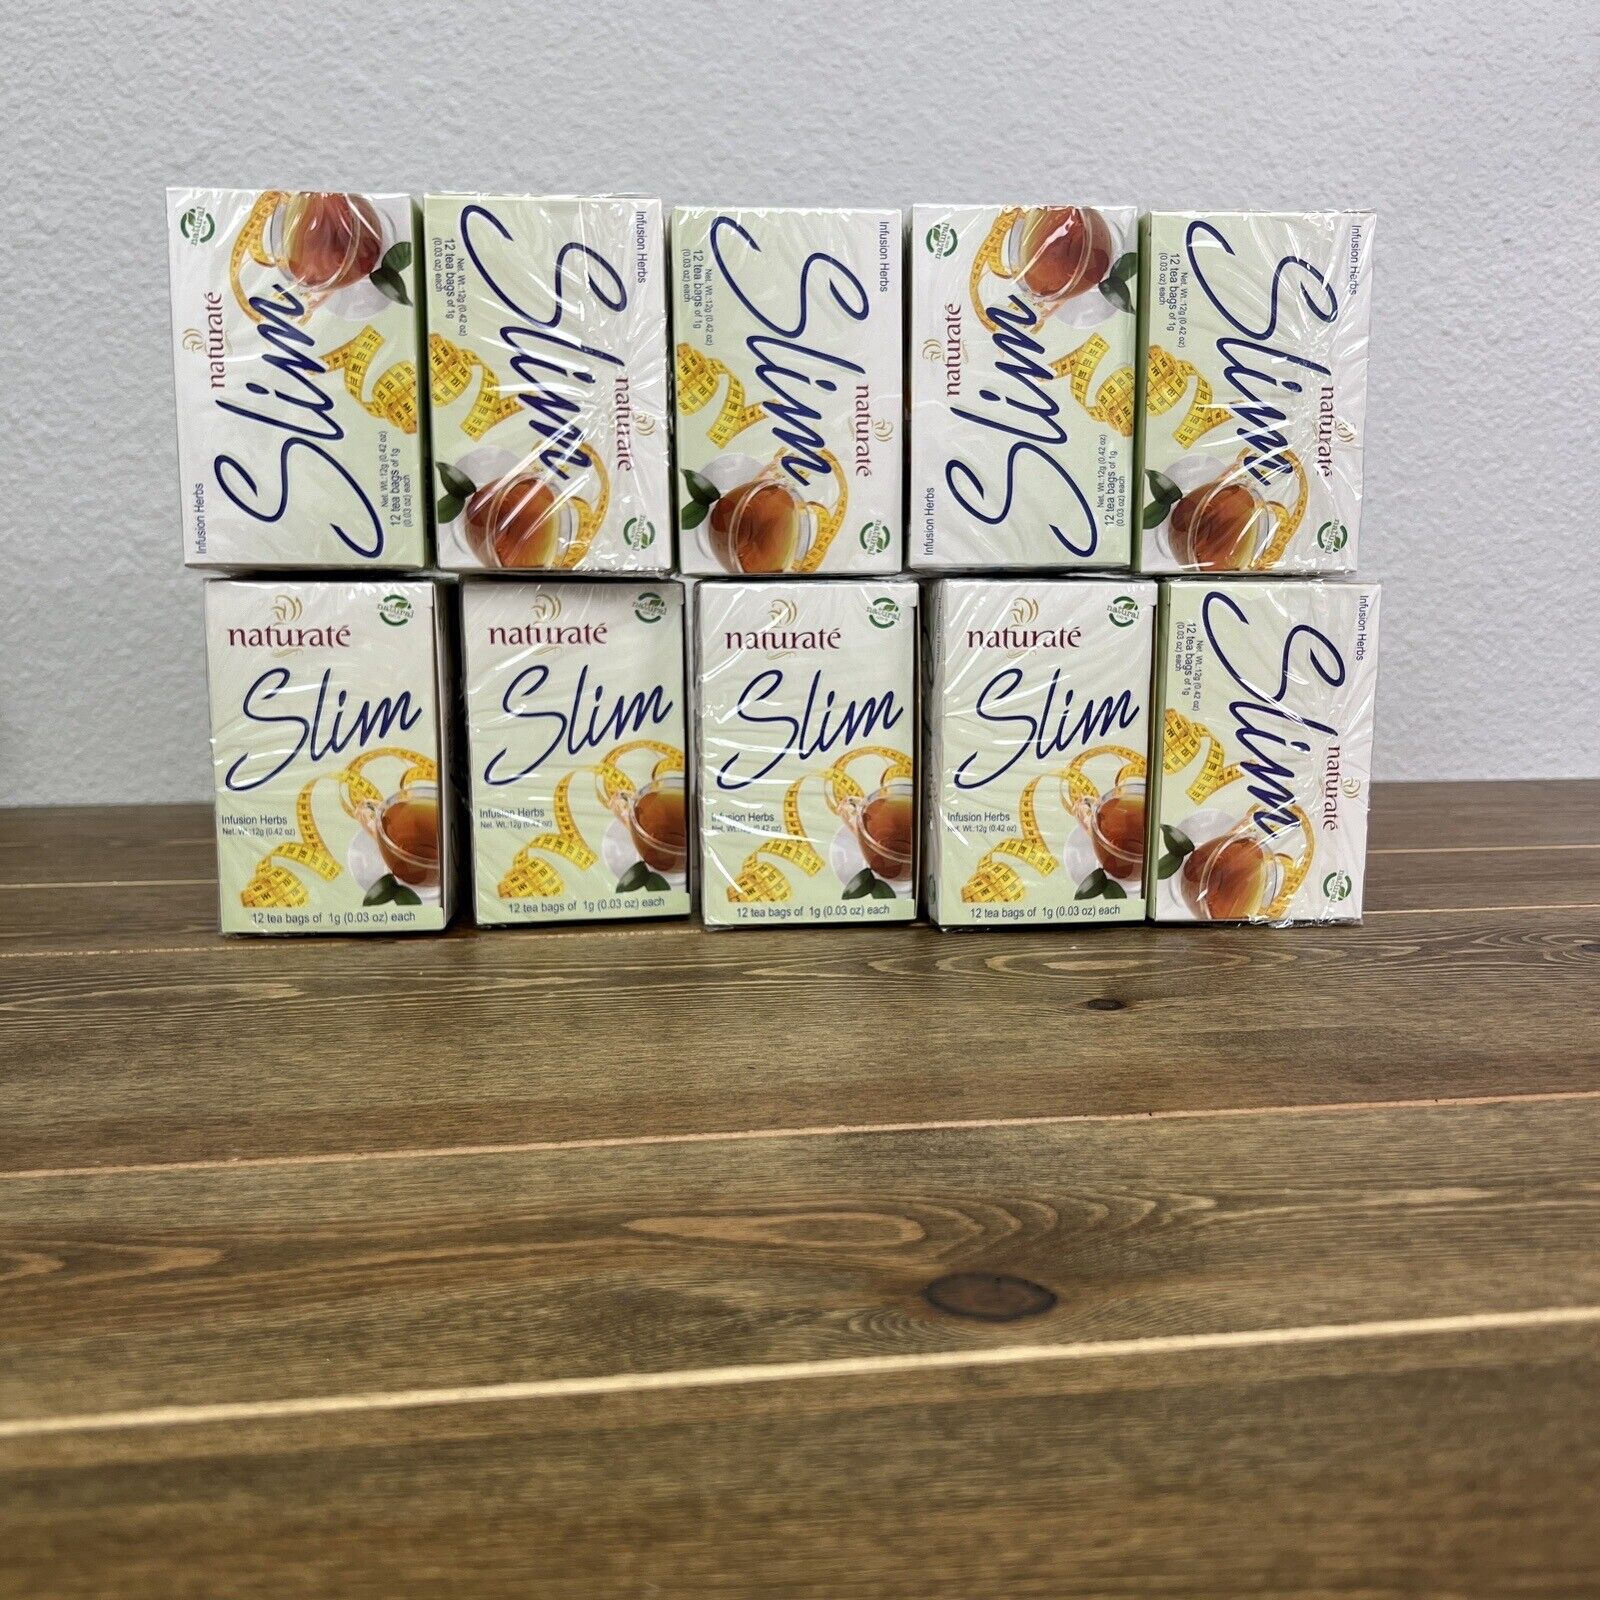 Infusion Herbs Naturate Slim Tea. 12 Tea Bags In Each Box. New Sealed 10 Boxes